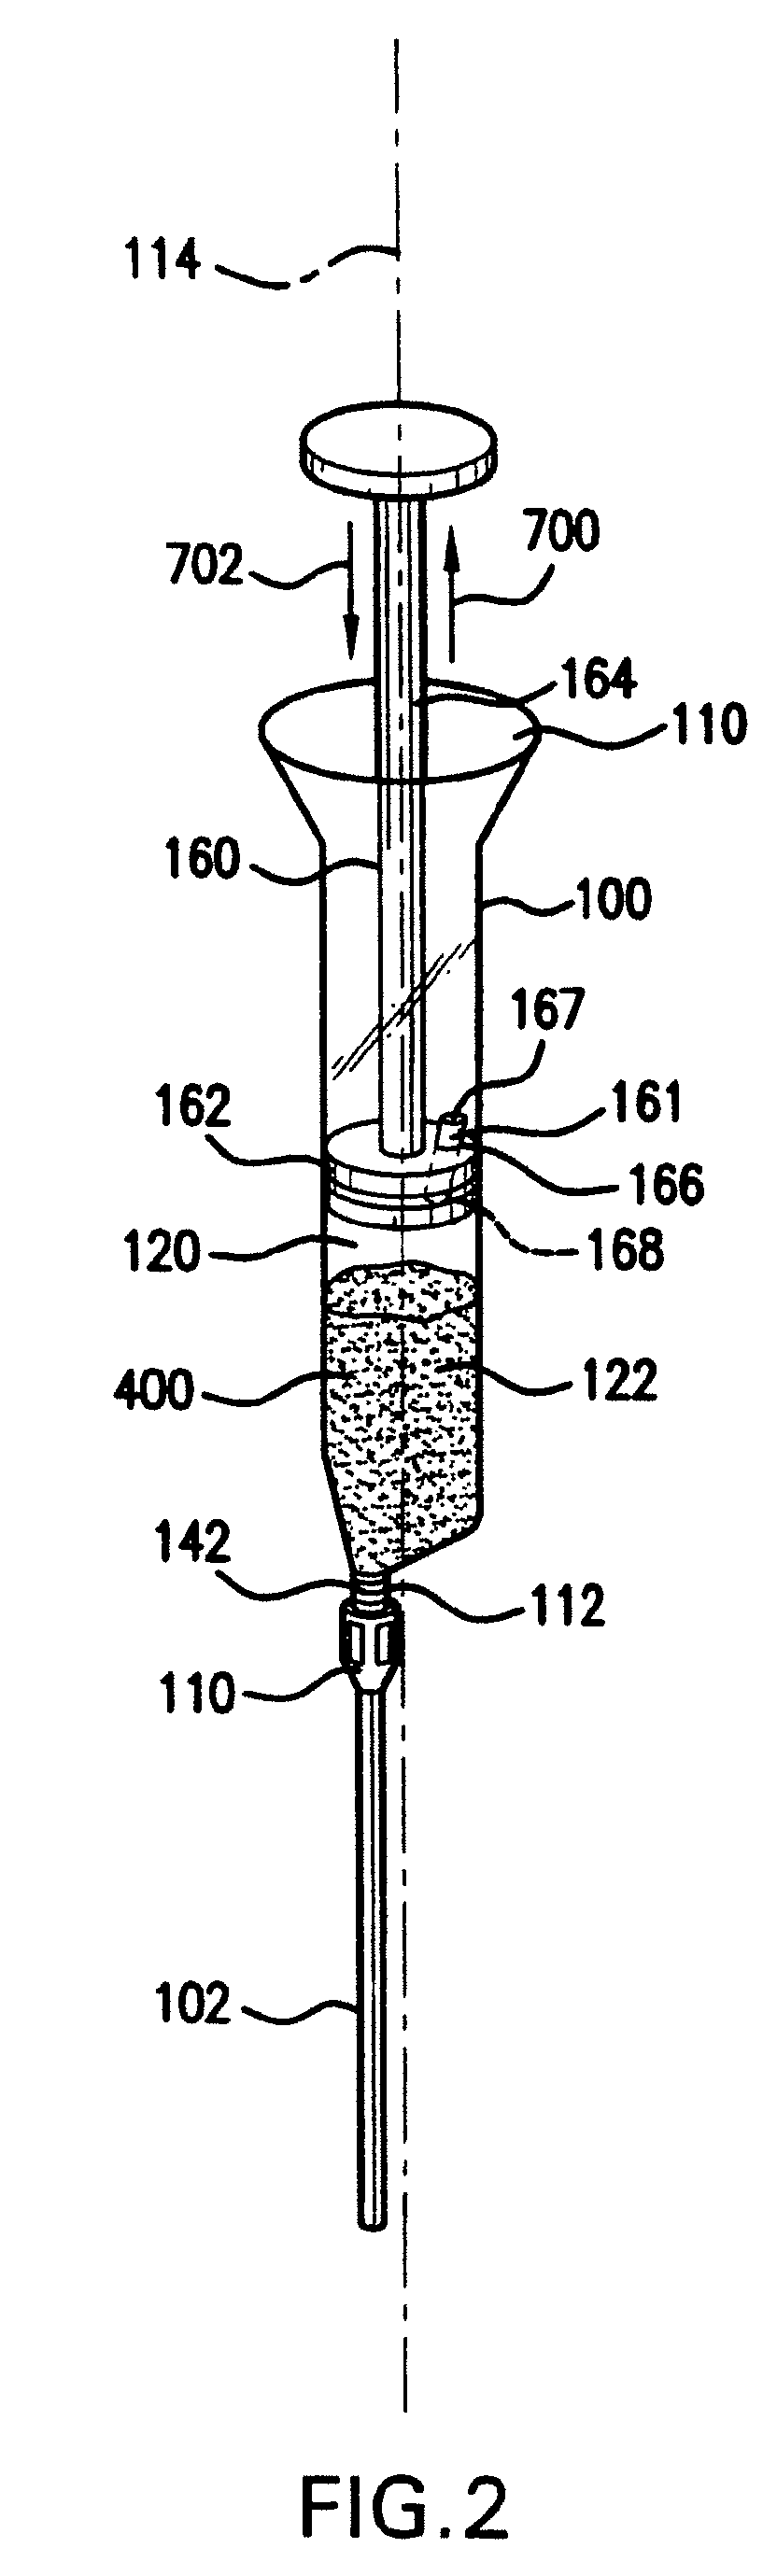 Fat collection and preparation system and method